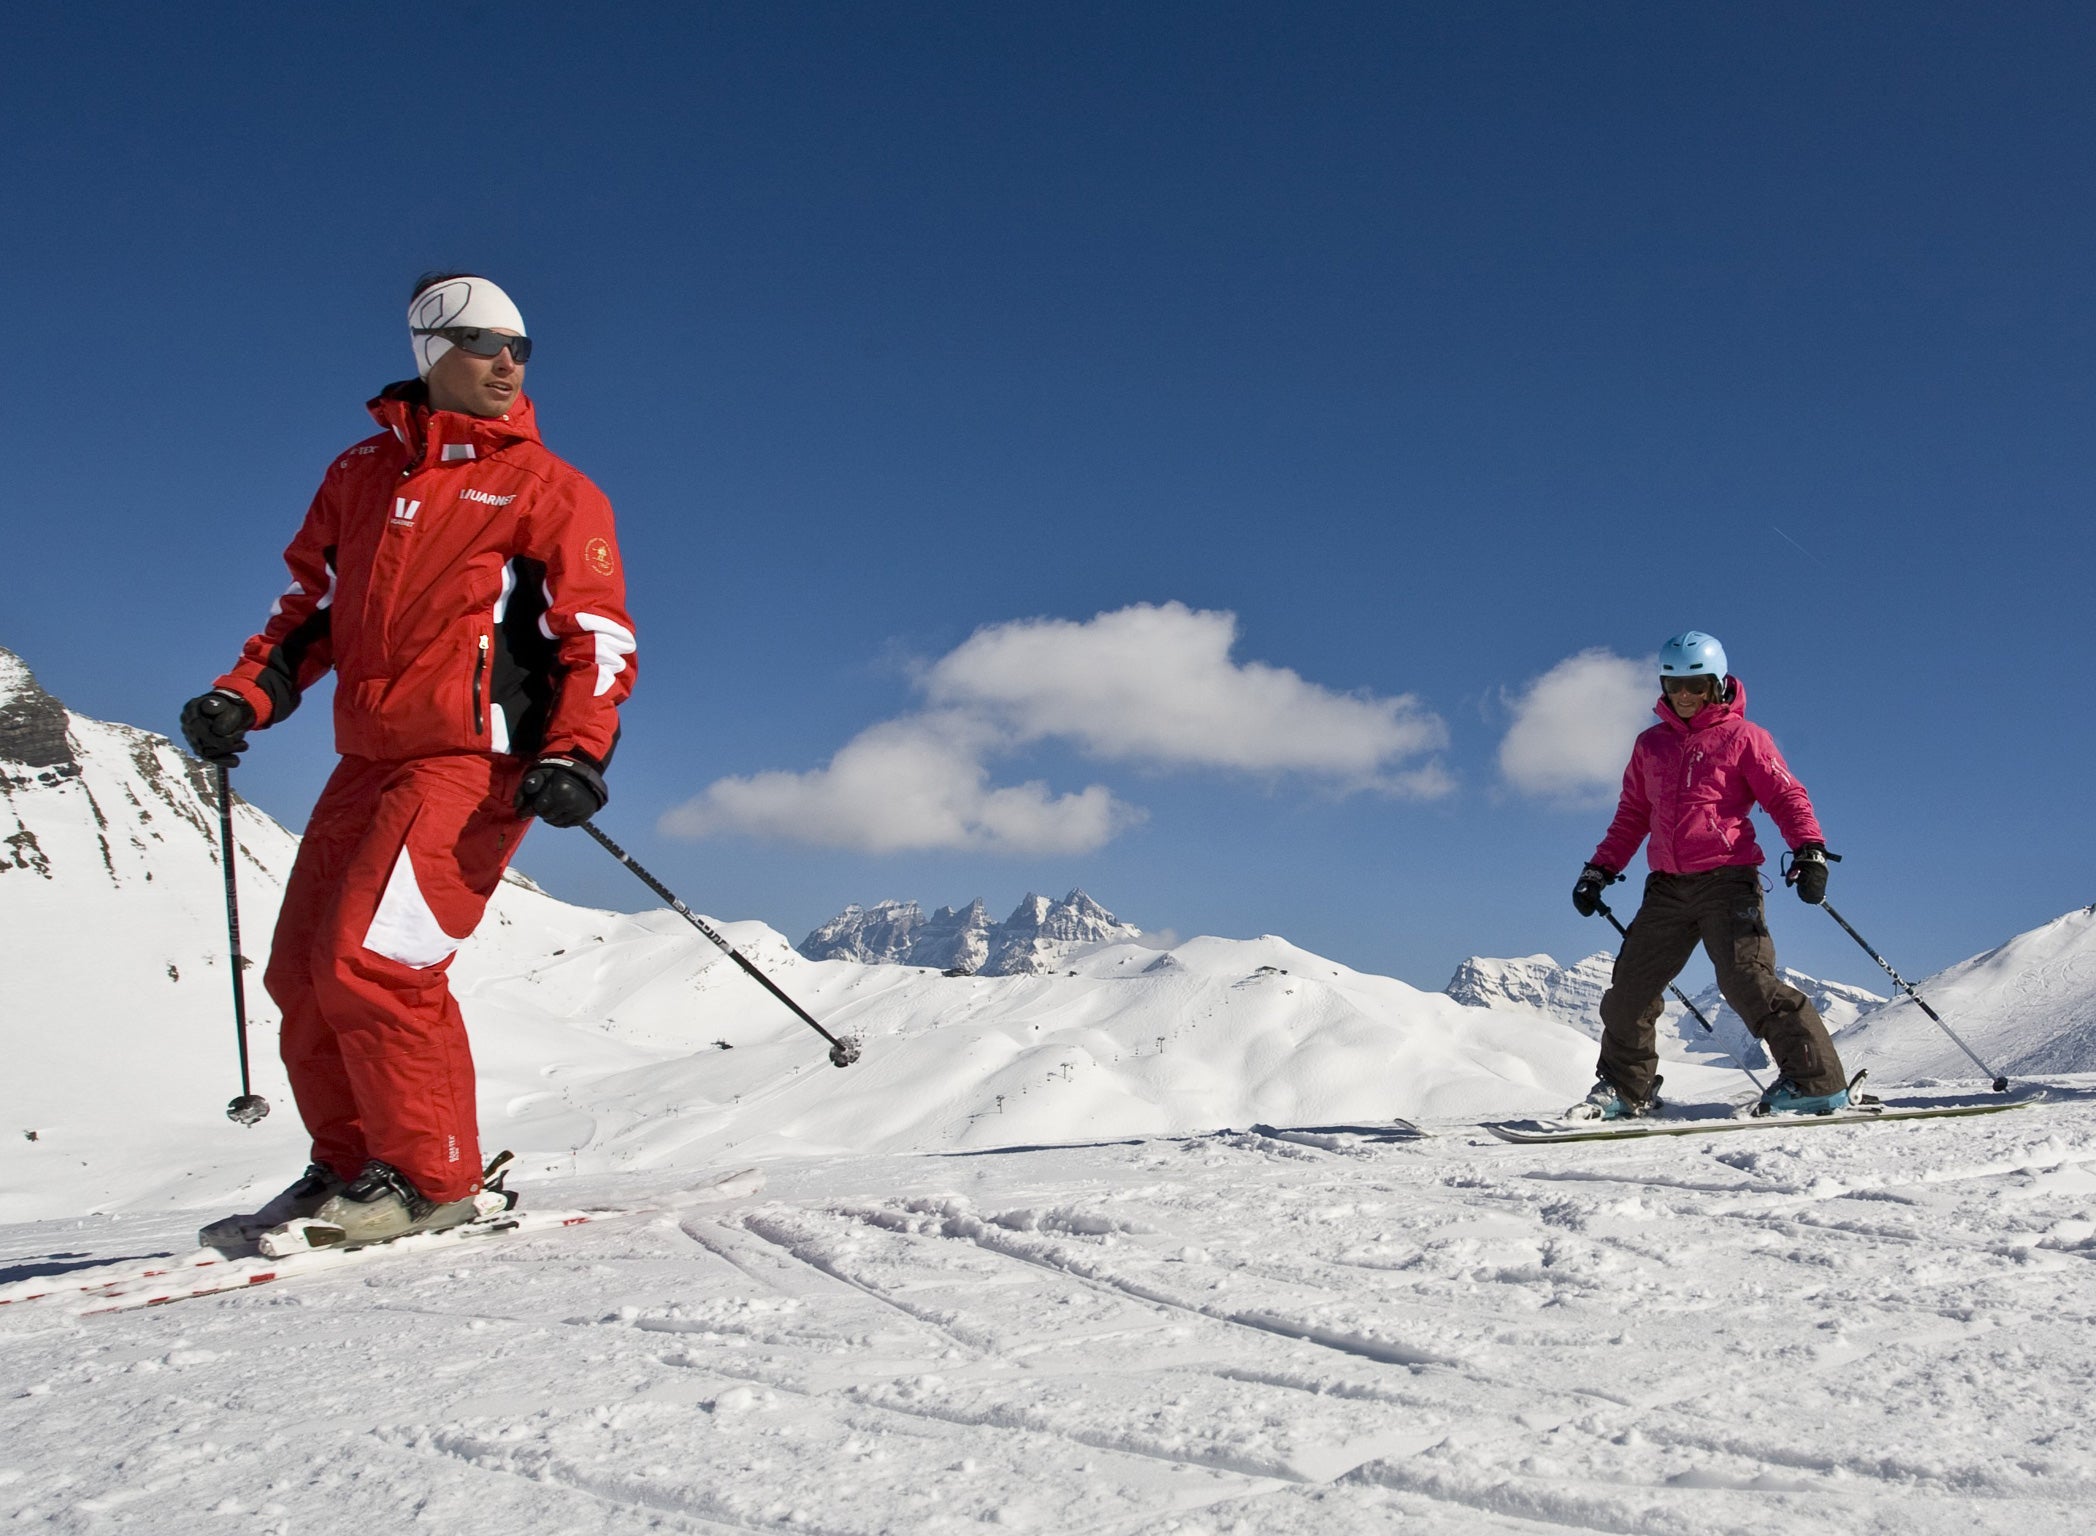 Gently does it: Learning how to ski in the Portes du Soleil